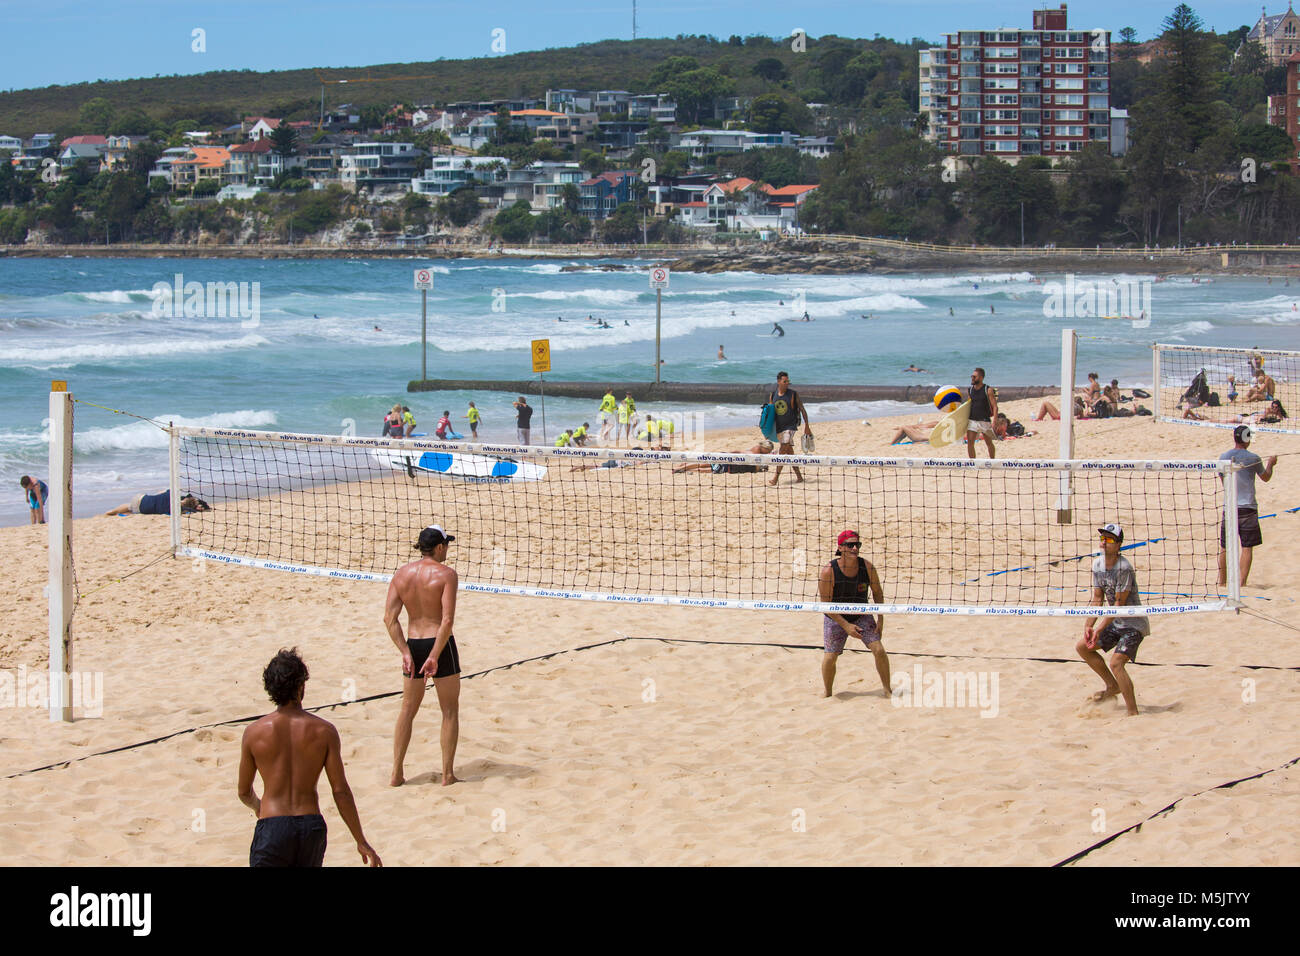 People playing beach volleyball on Manly beach in Sydney, New South Wales,Australia Stock Photo